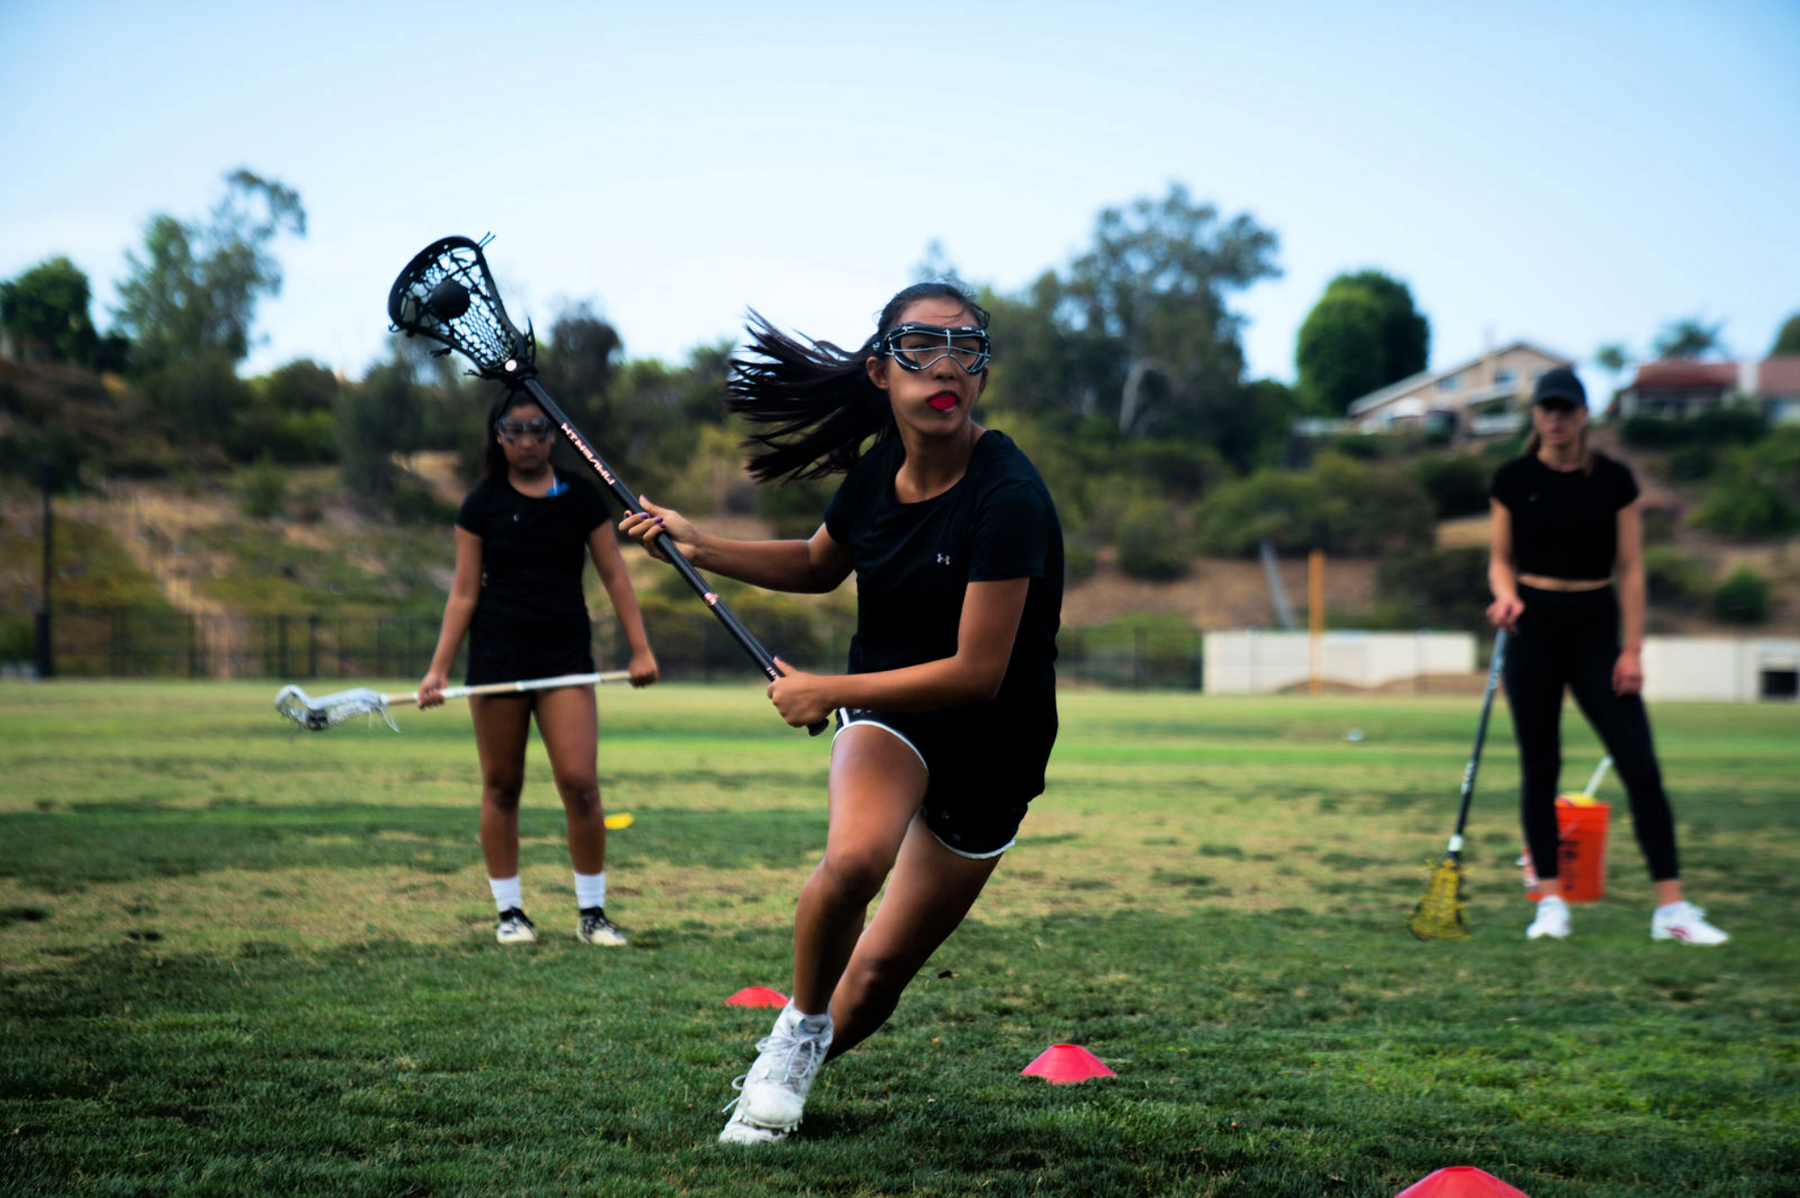 Triad Athletes San Diego girls and womens lacrosse based company with best lacrosse content out there